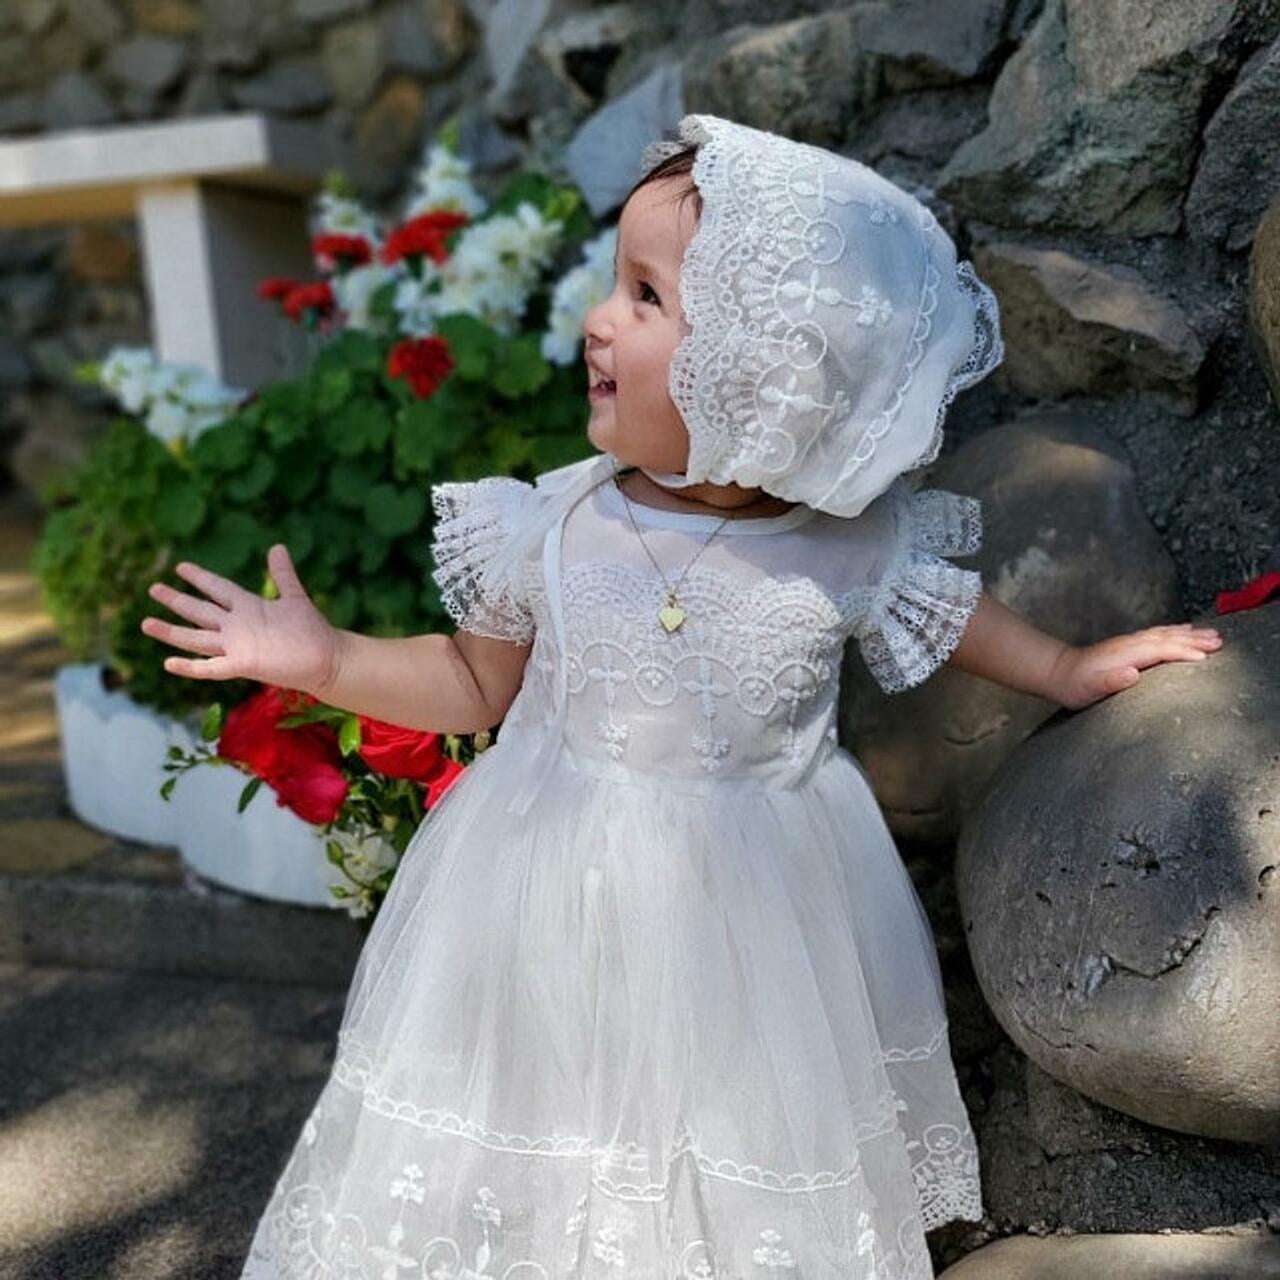 Girl Lace White Flower A-lined Dress Christening Summer 